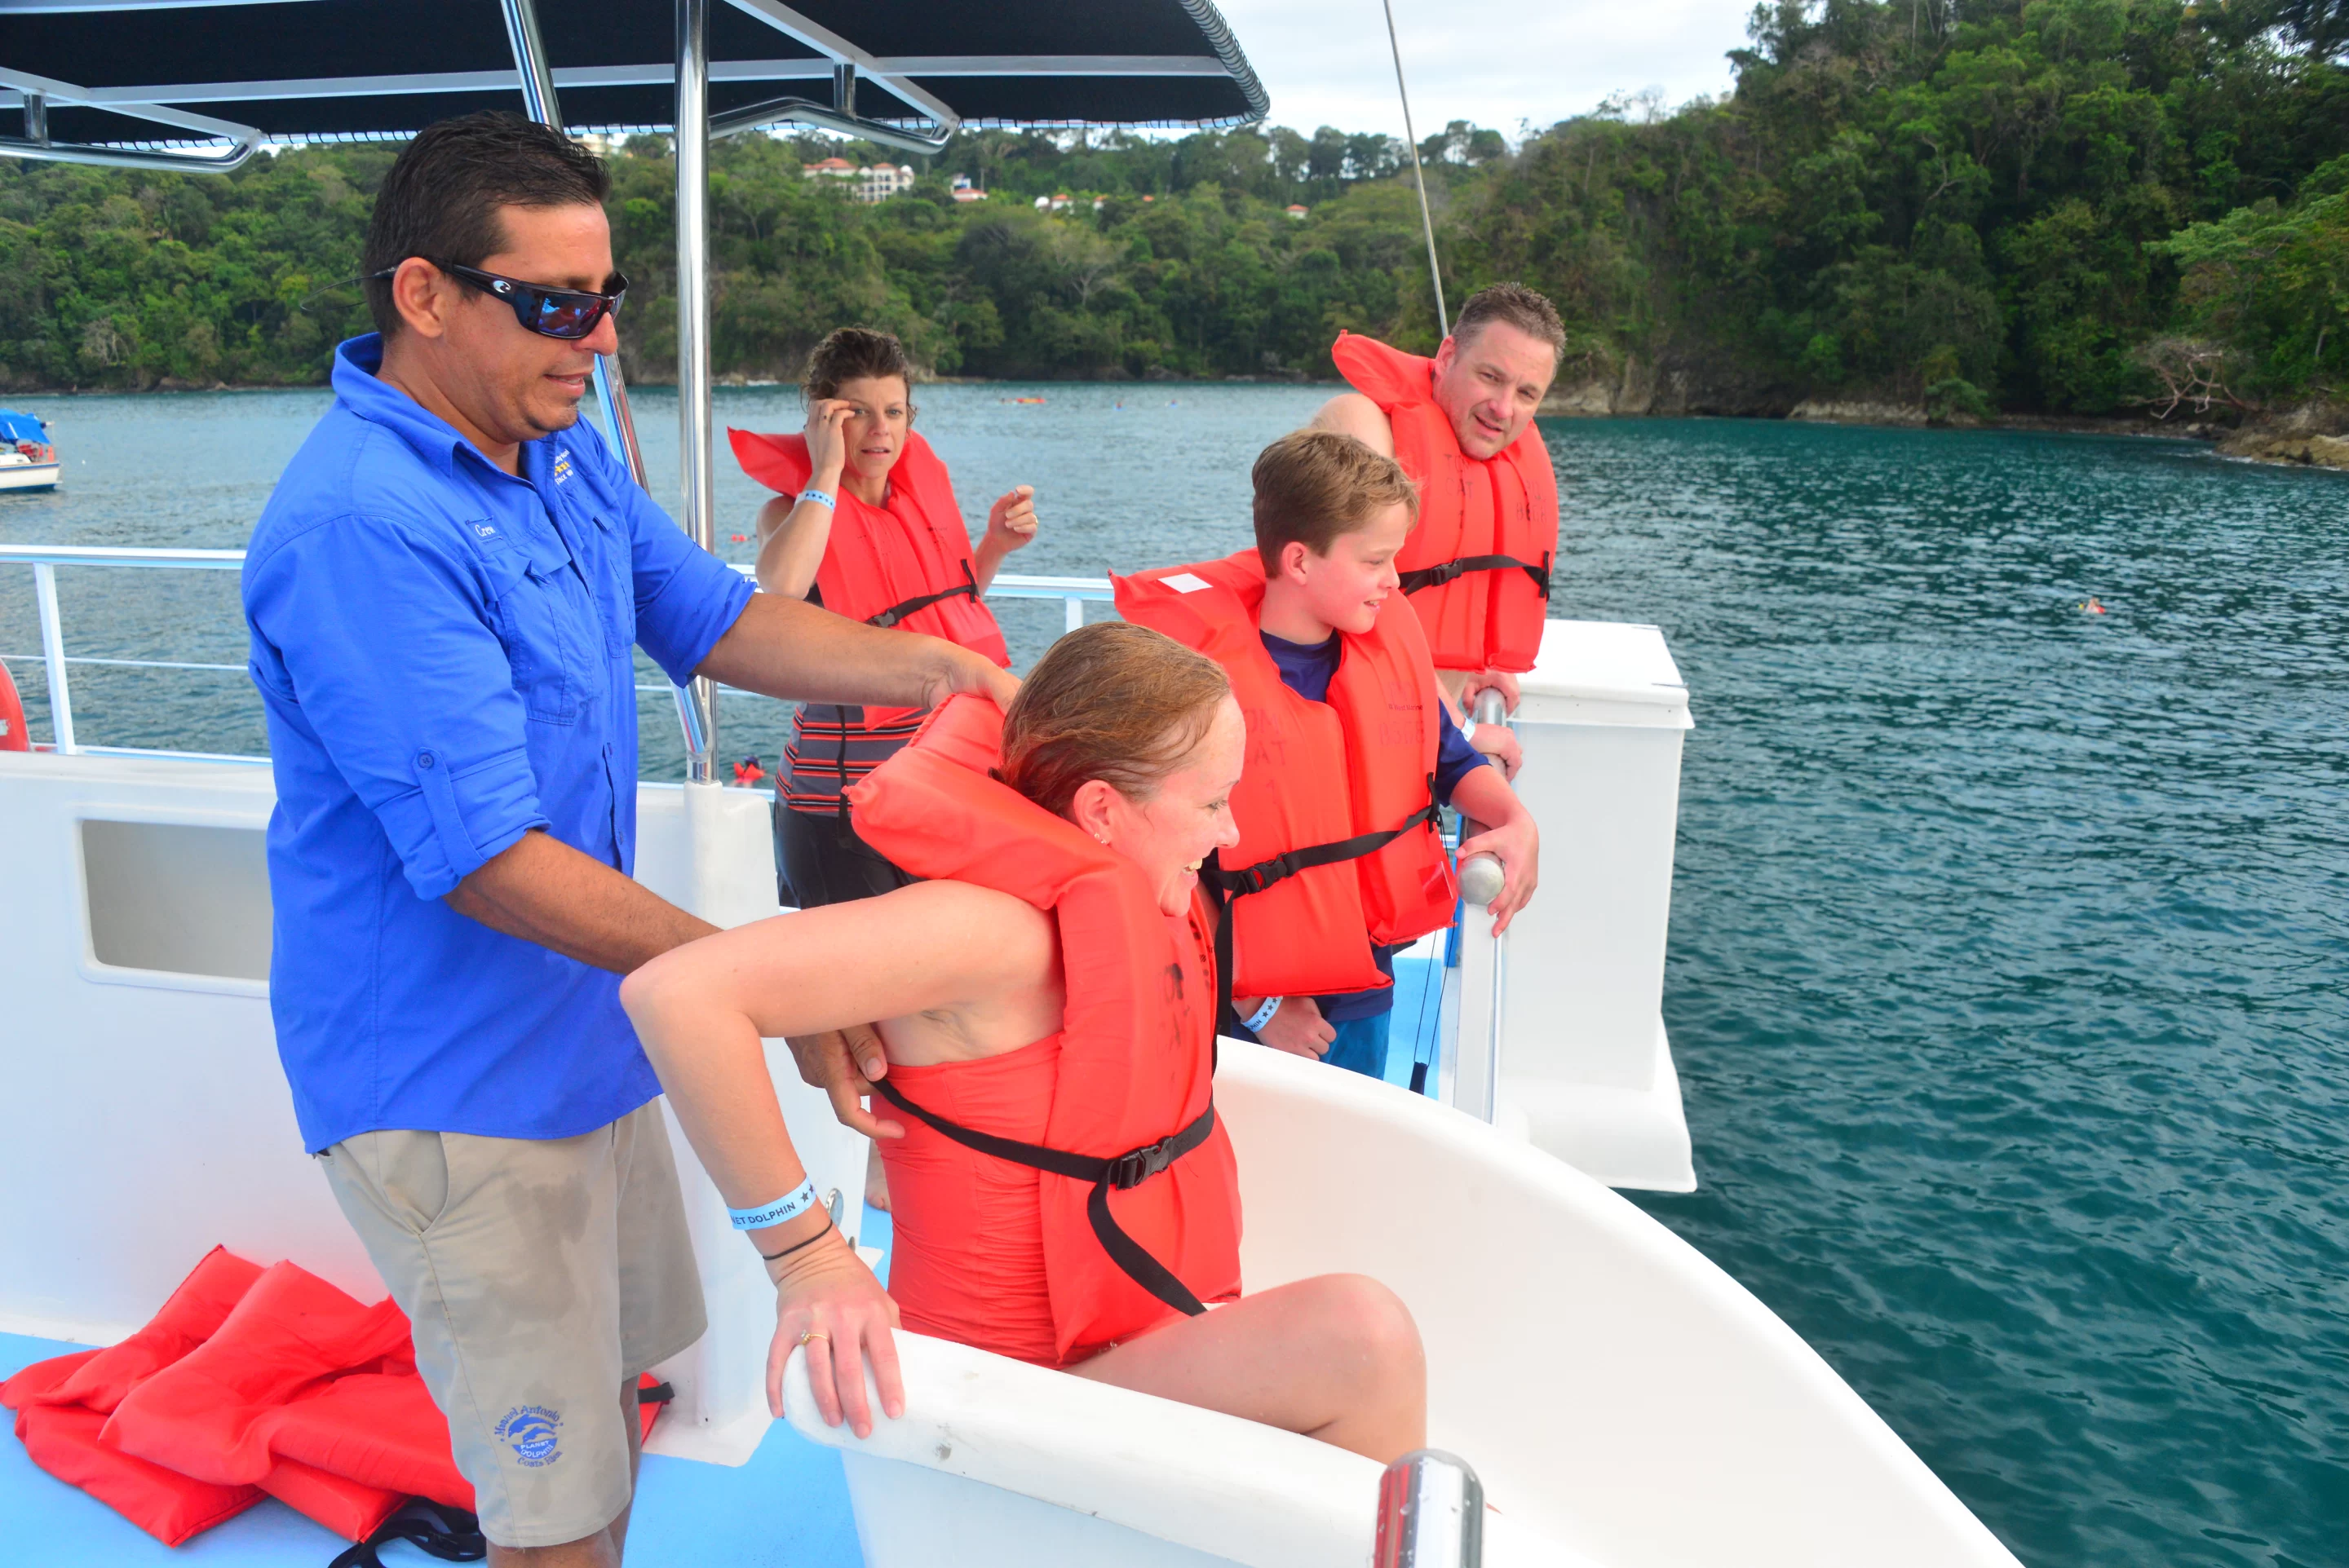 Visit Manuel Antonio National Park or other Costa Rica's national parks by taking necessary precautions.